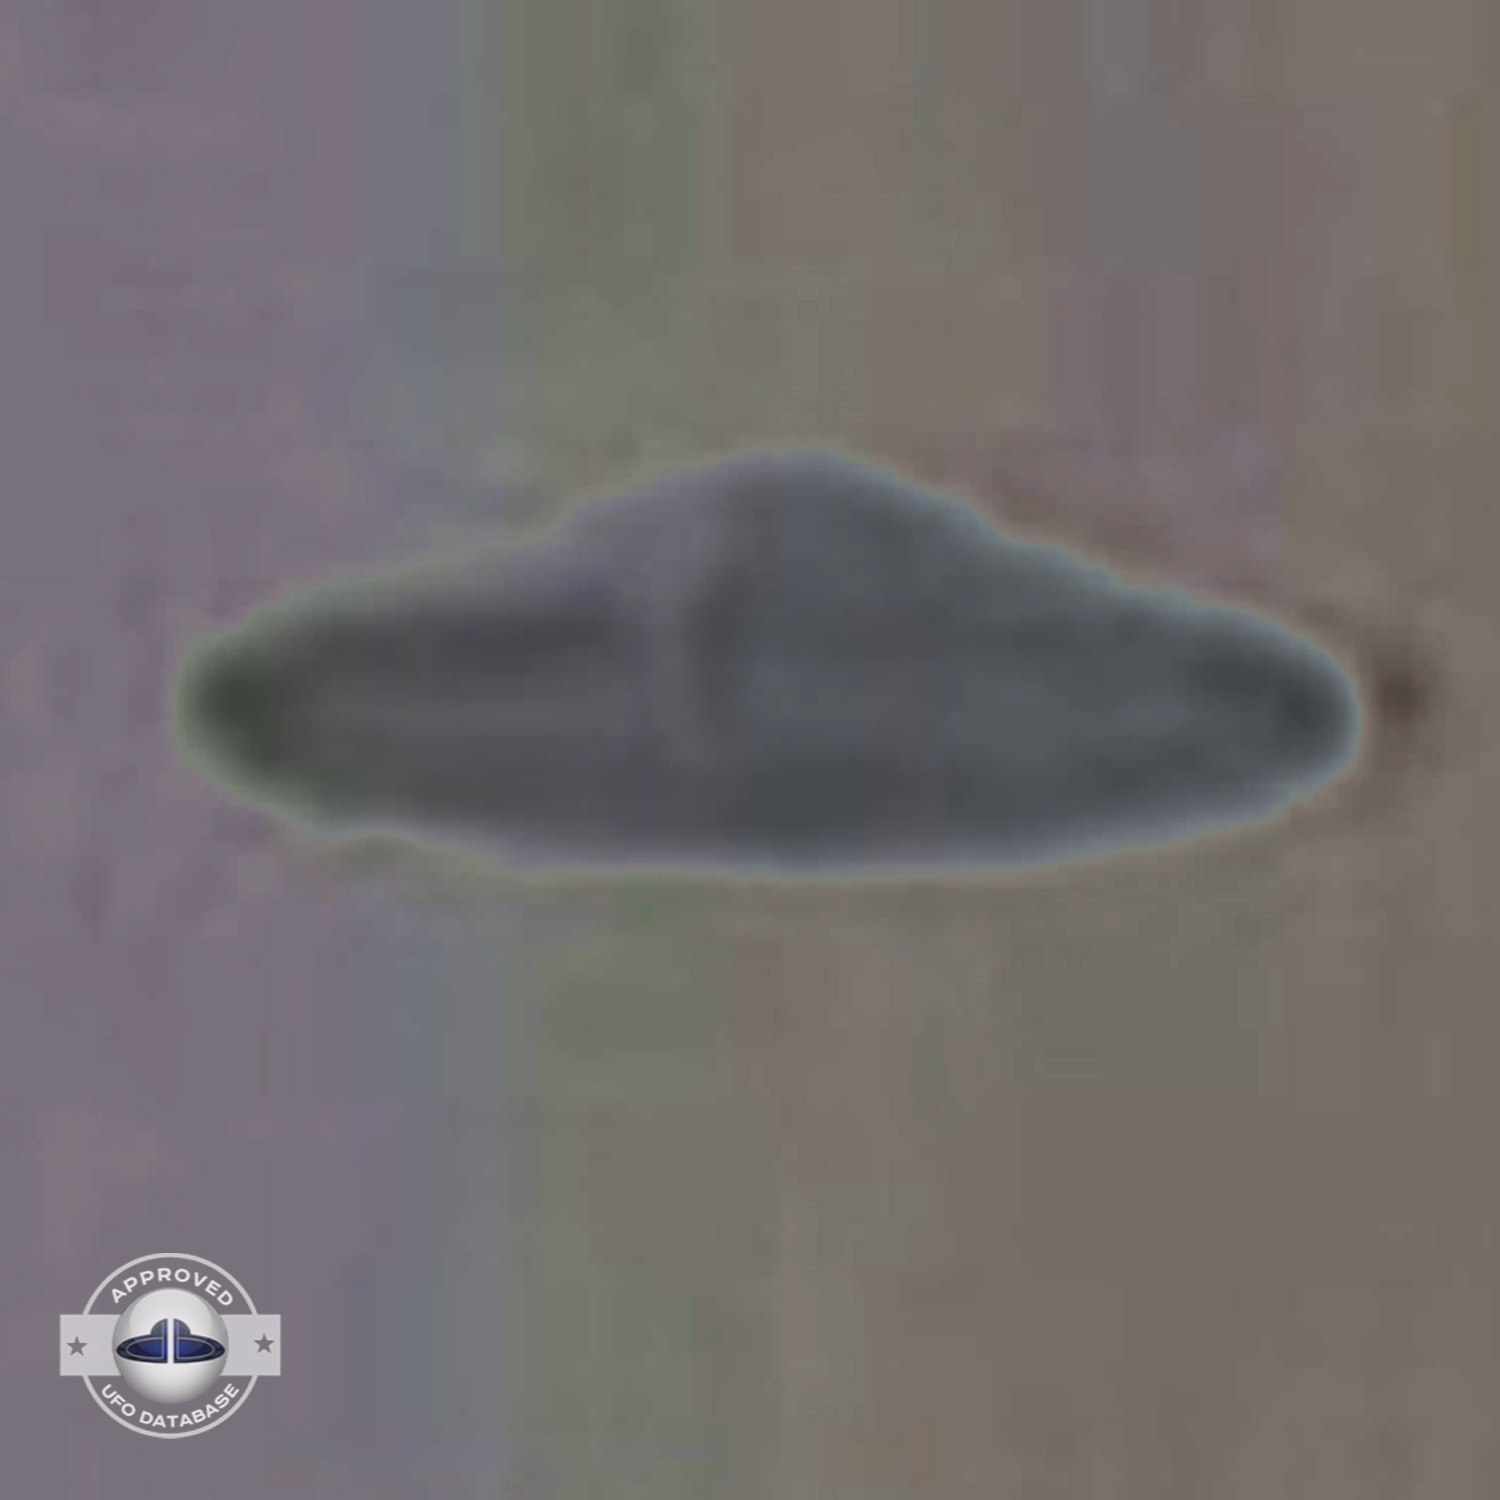 Mexico city August 6 1997 UFO Pictures from famous video (UFOdB.com) UFO Picture #55-7